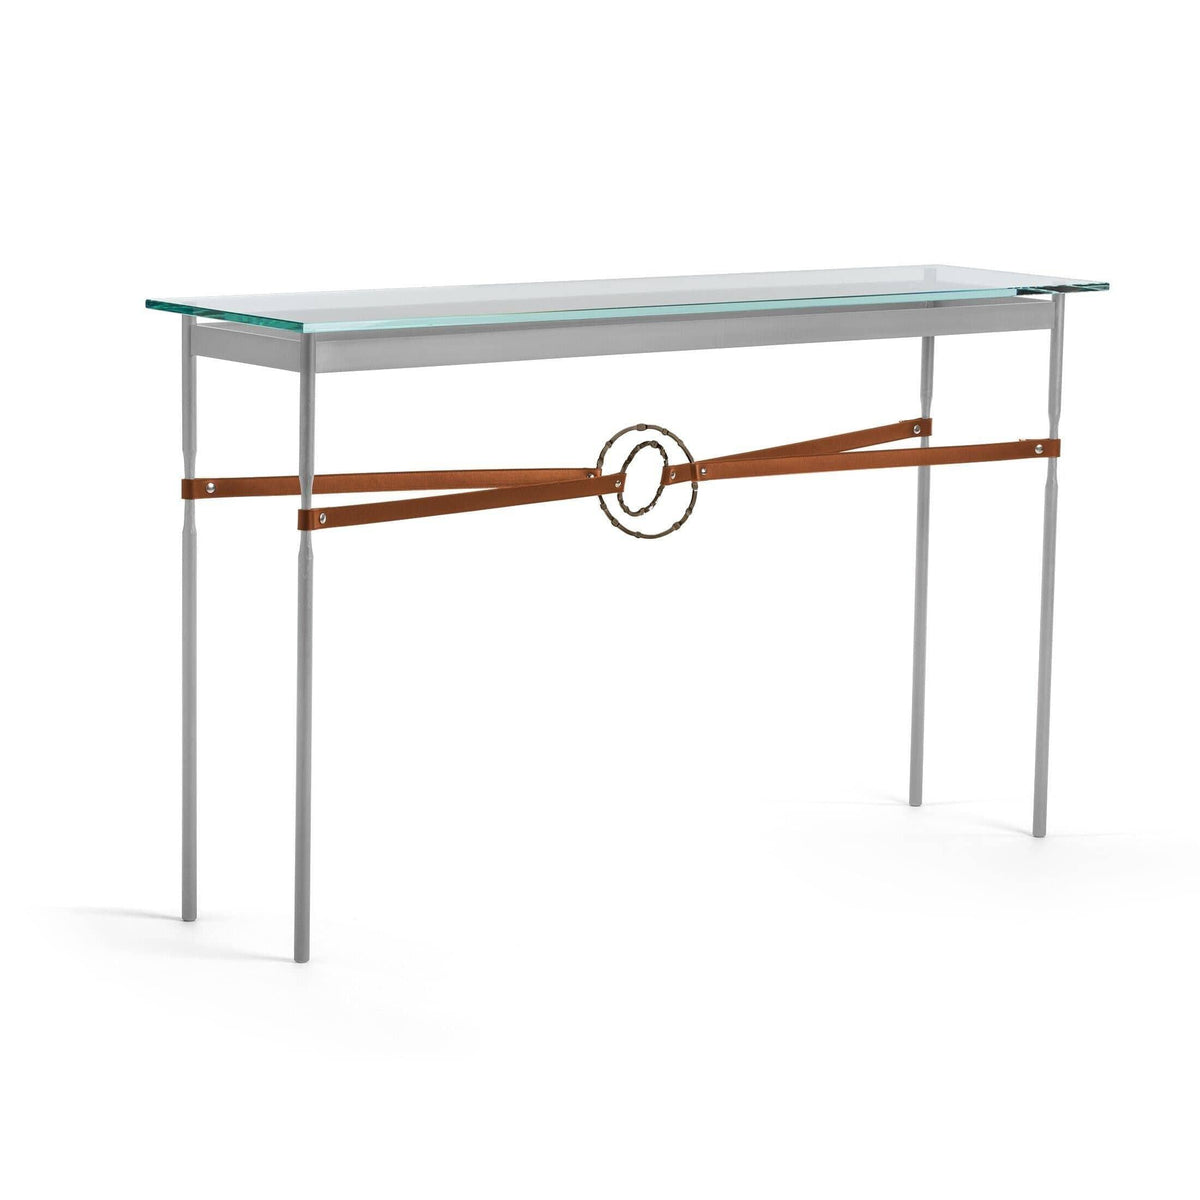 Hubbardton Forge - Equus Chestnut Leather Console Table - 750118-82-05-LC-VA0714 | Montreal Lighting & Hardware